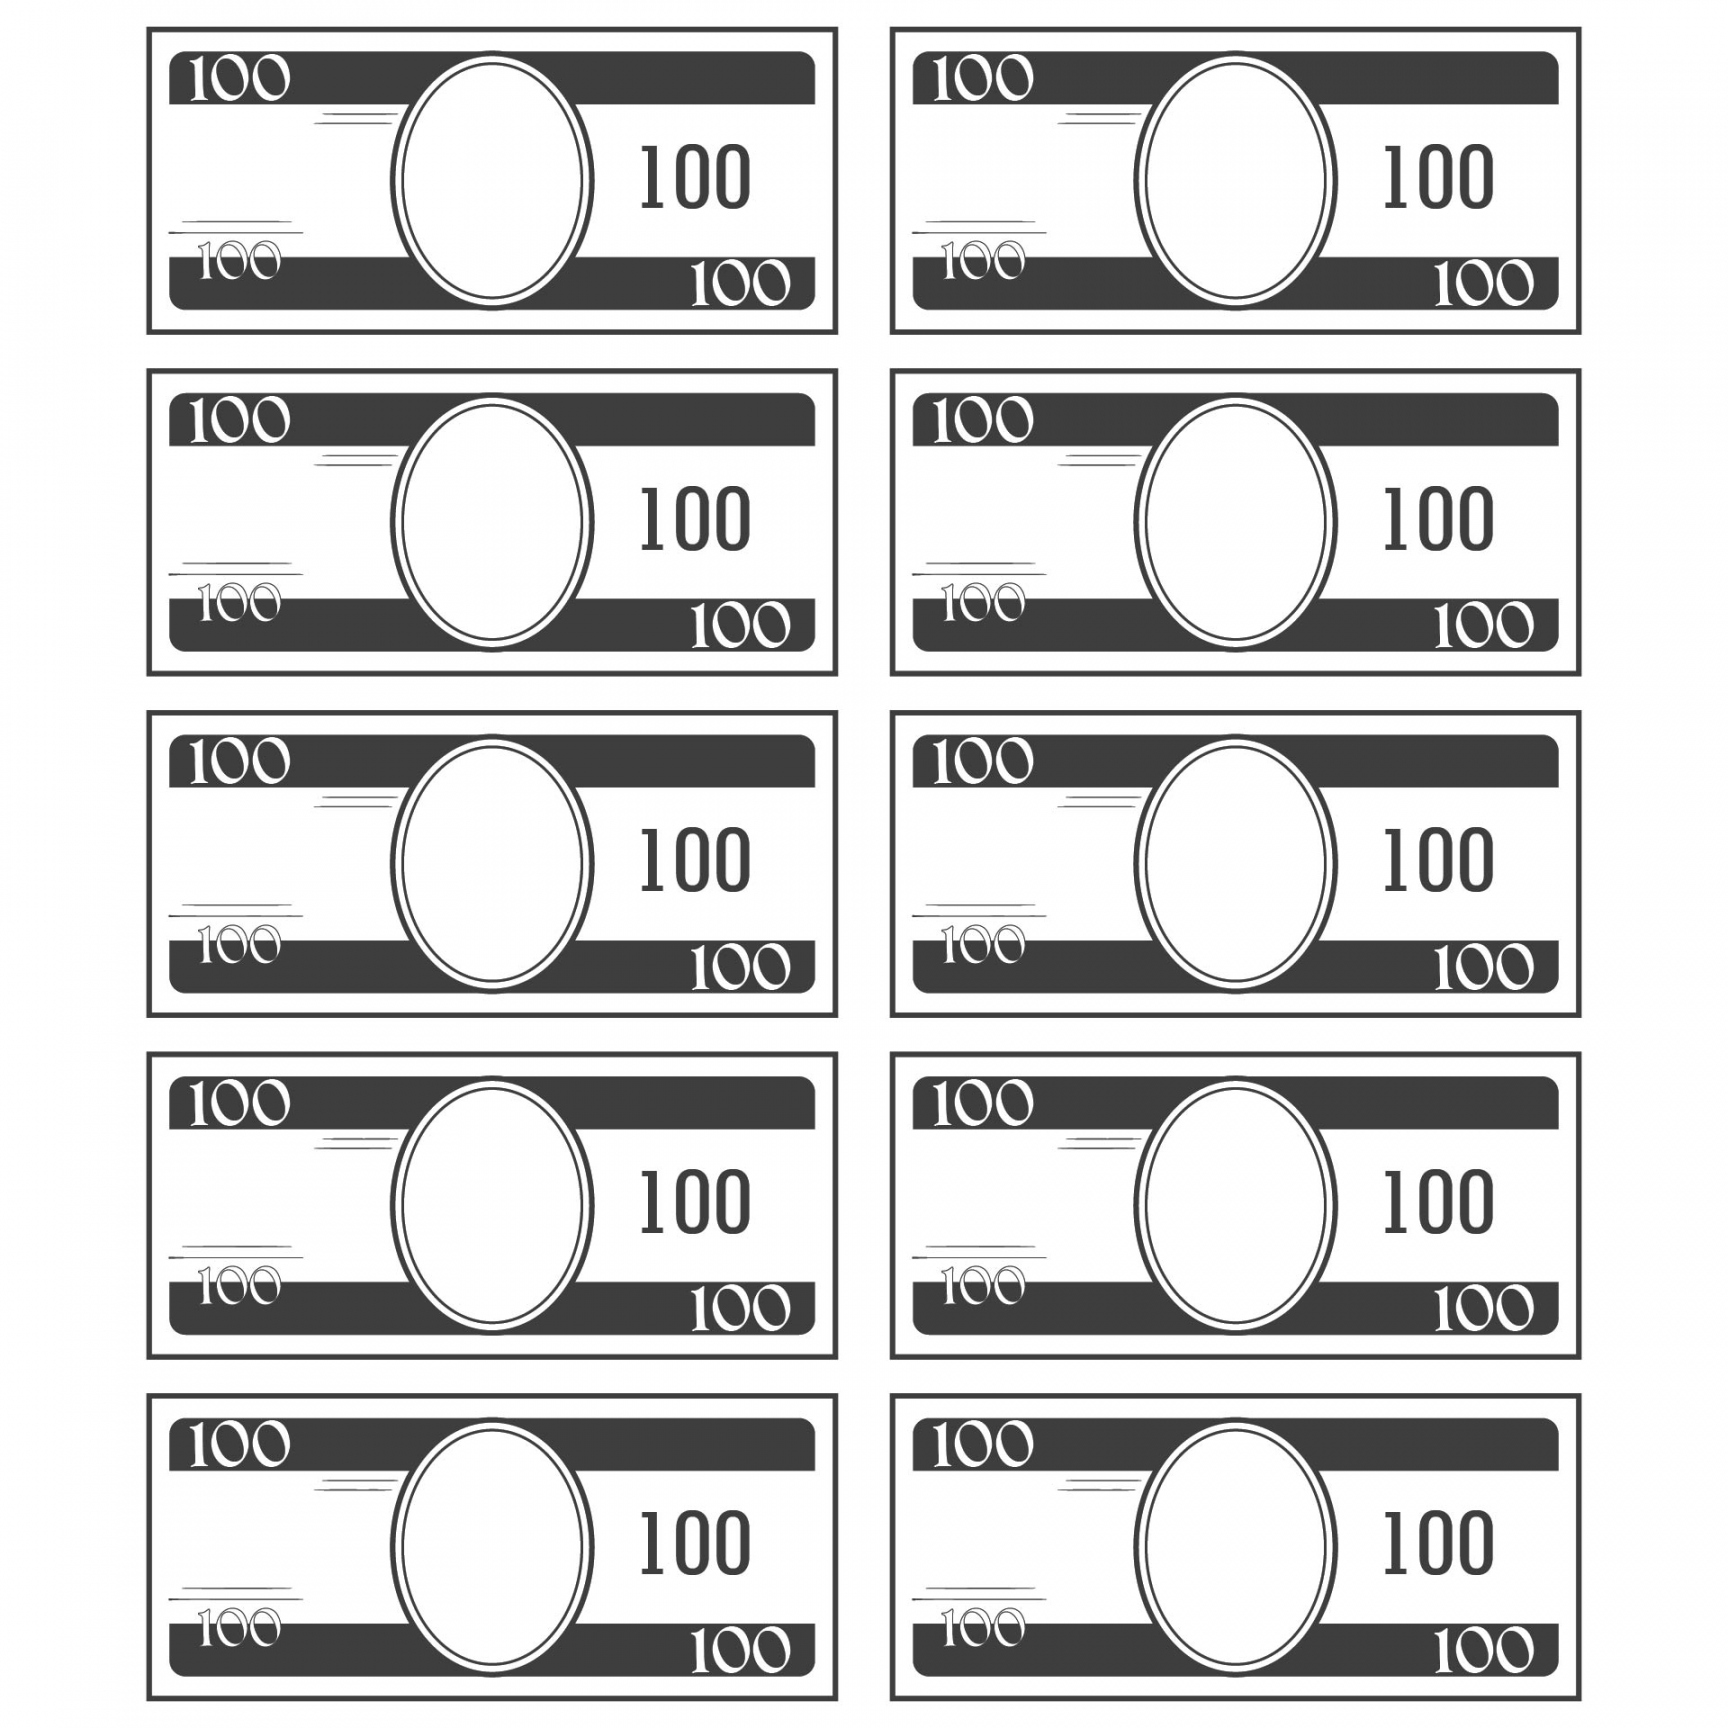 Best Printable Play Money Actual Size - printablee - Free Printable Printable Play Money Black And White